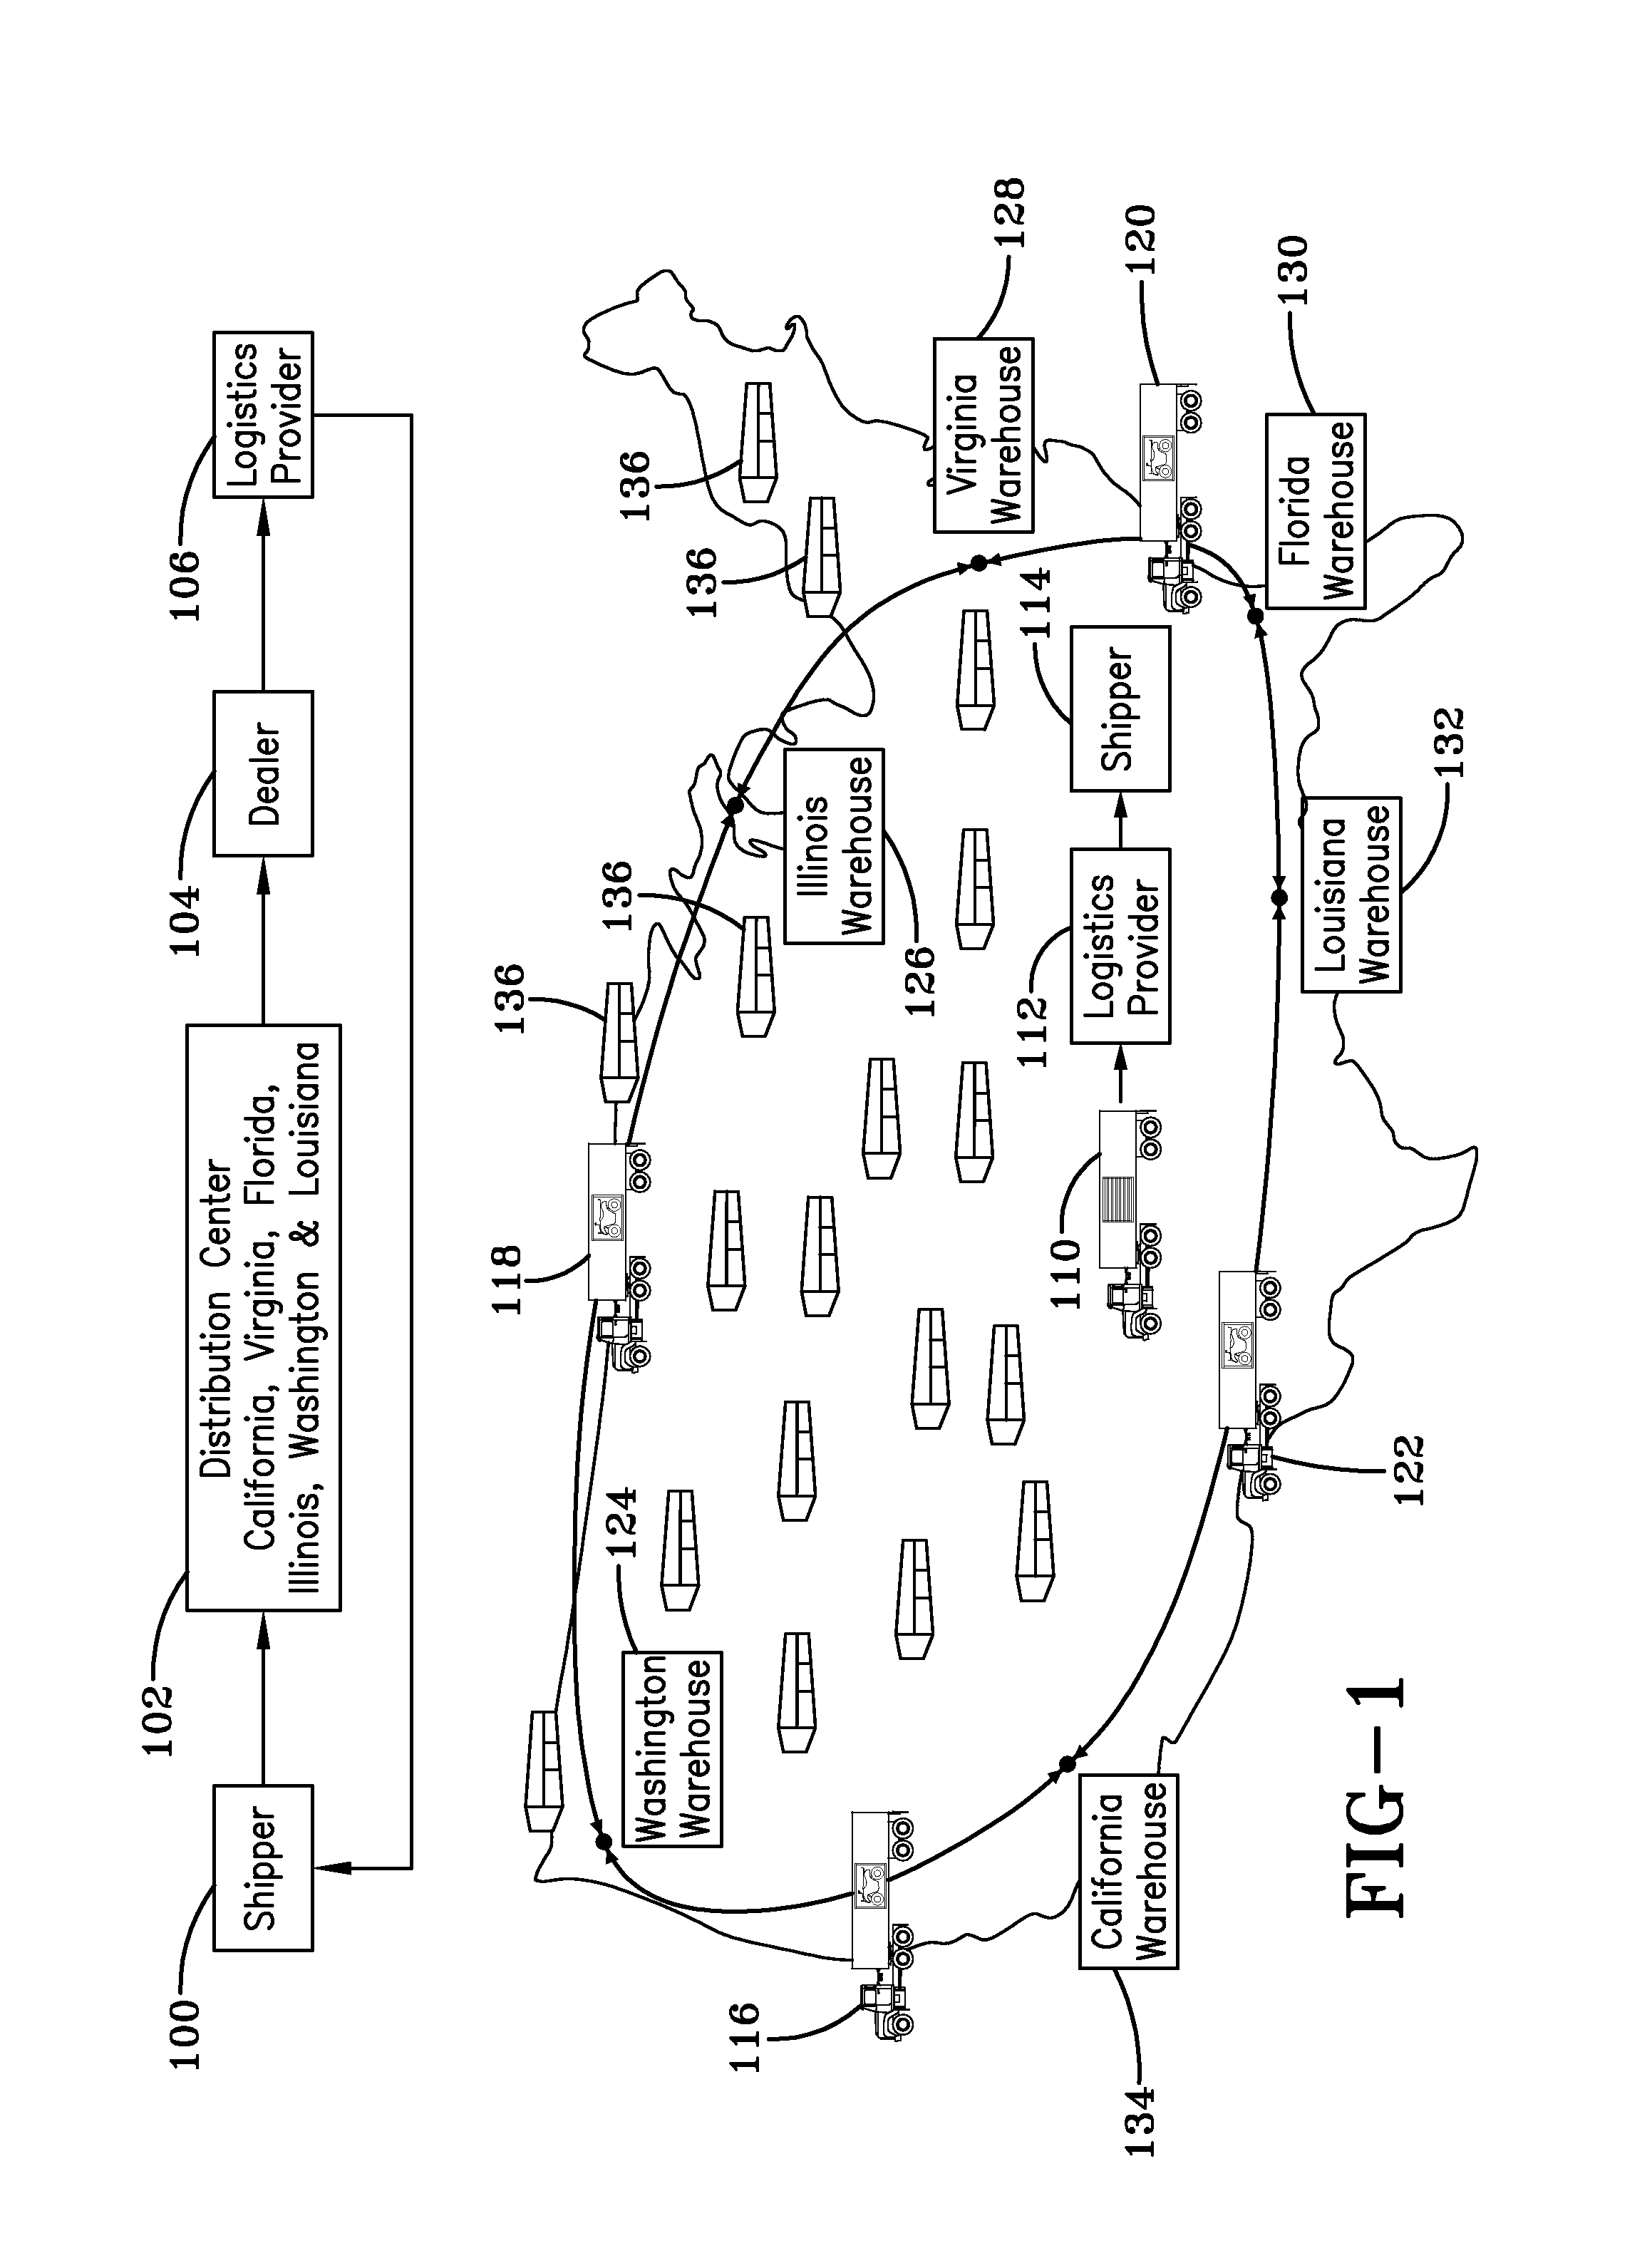 Returnable container management and repair system and method